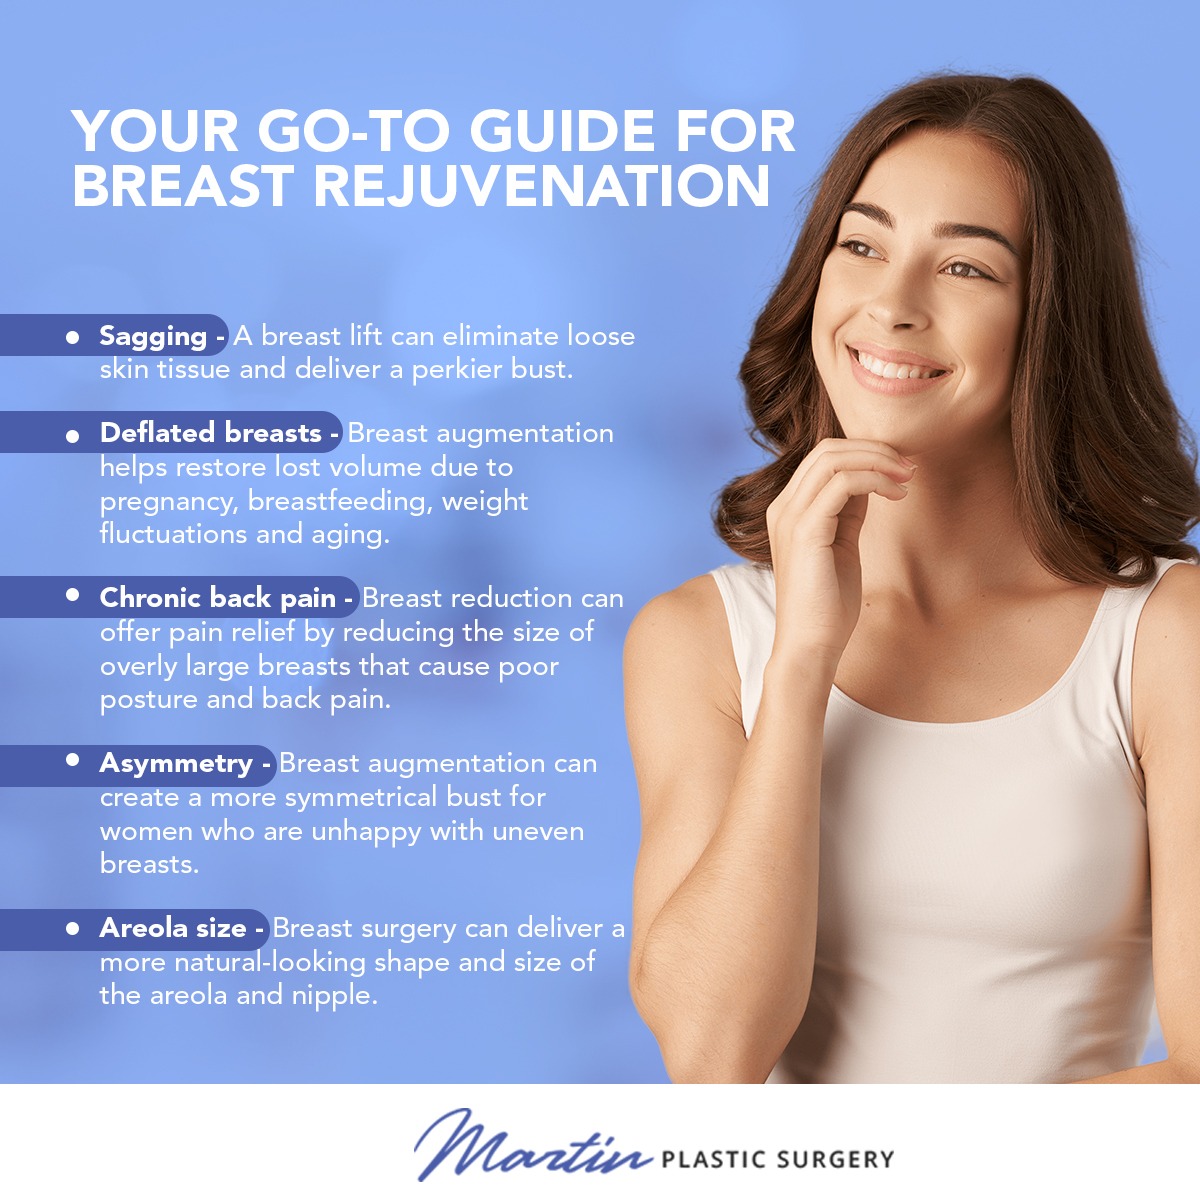 Your Go-To Guide for Breast Rejuvenation